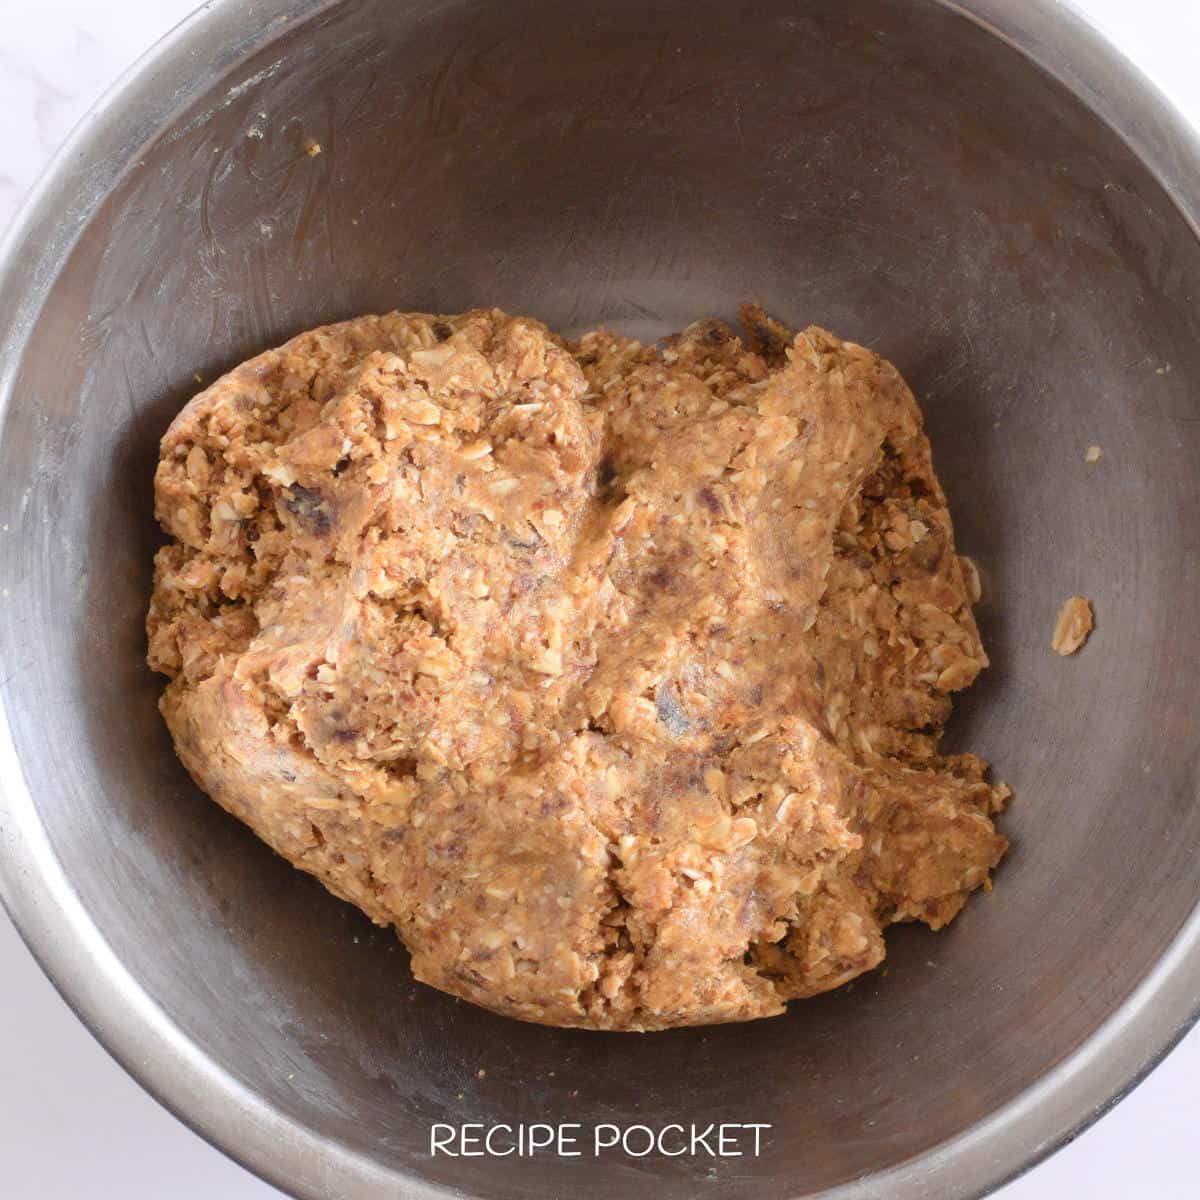 Image showing what the peanut butter and oatmeal mixture should look like before shaping into balls.